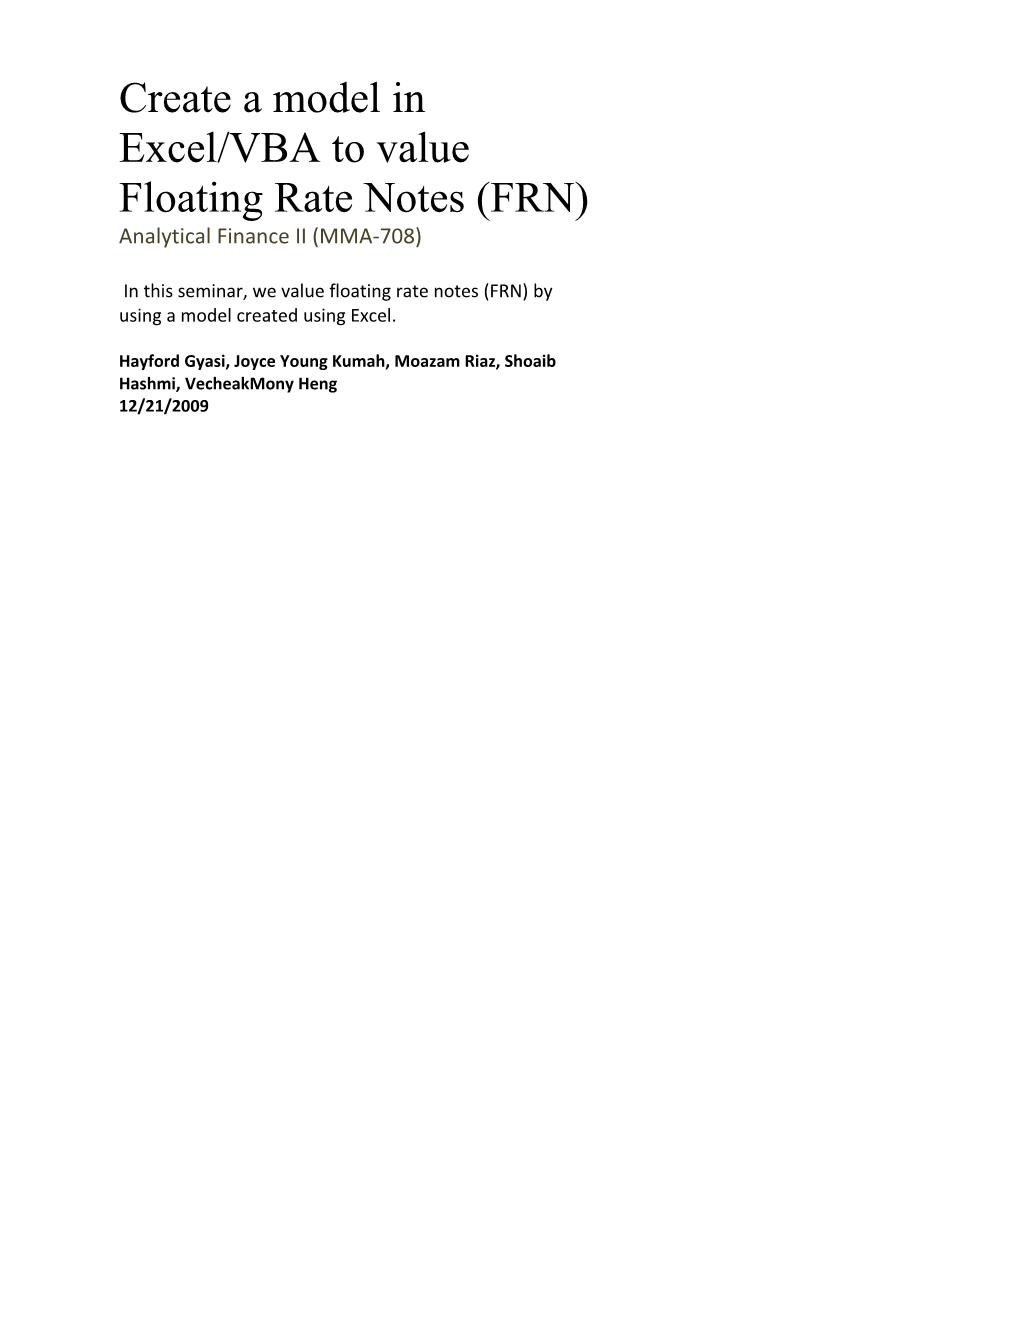 Create a Model in Excel/VBA to Value Floating Rate Notes (FRN)